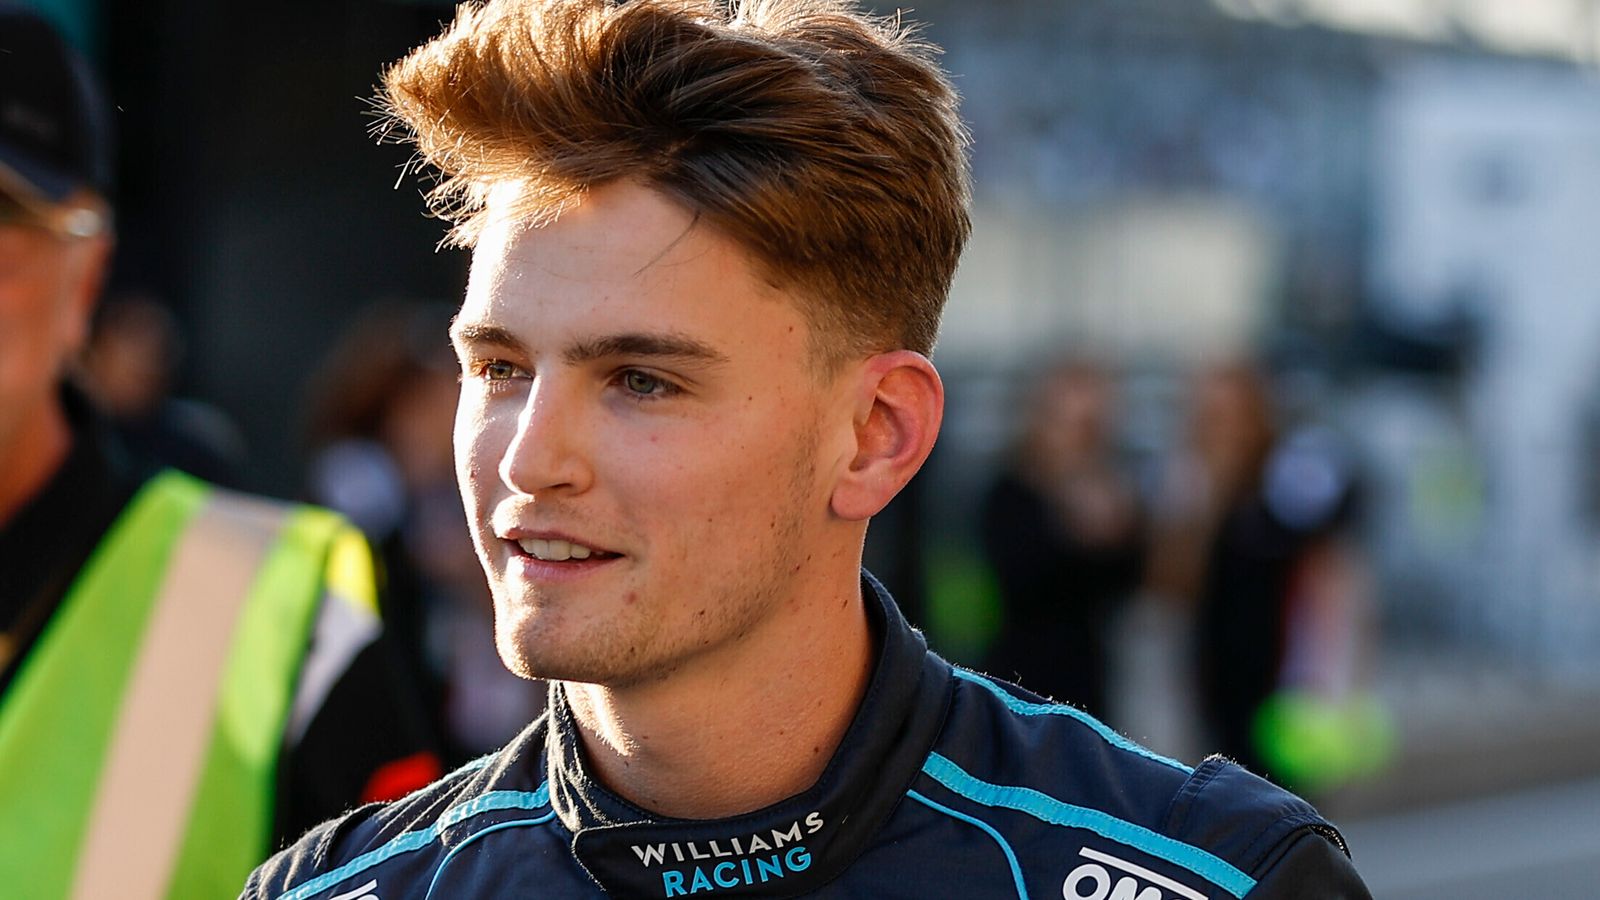 Logan Sargeant to drive for Williams in 2023 pending FIA super licence approval